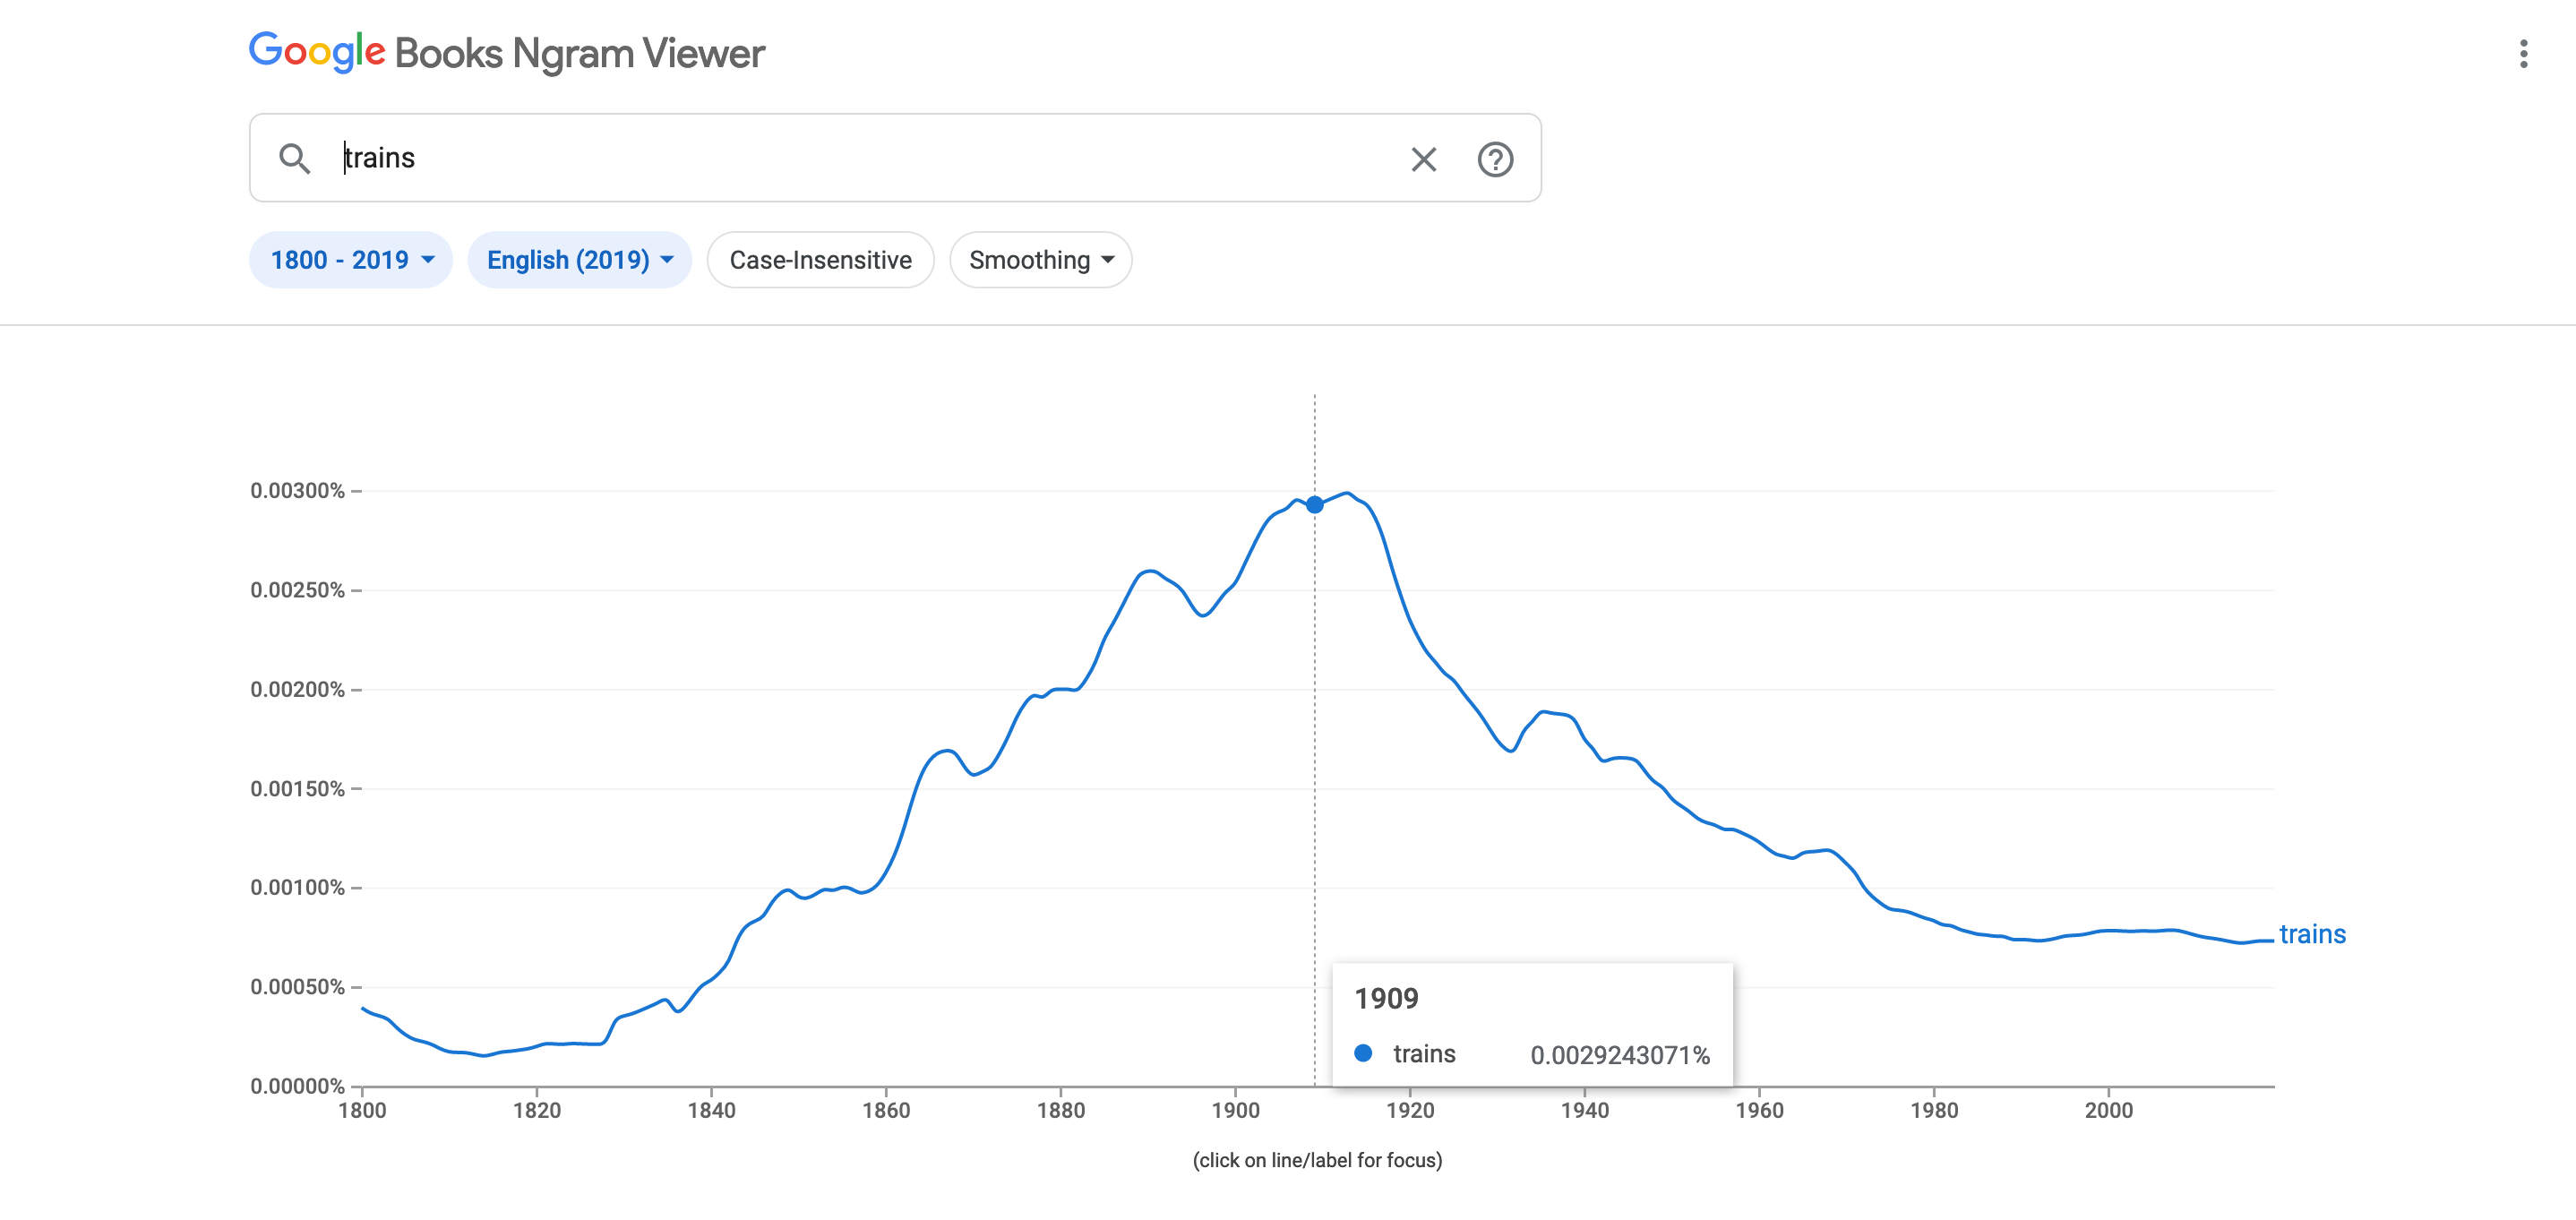 "A screenshot of a search result for the word trains on Google Books Ngram Viewer. Image shows an upward rising graph in the 1800s, reaching its peak in the early 1900s and falling since then. It's an indication that the word trains was most popular in books in the 1900s and is now too common to be a trend."